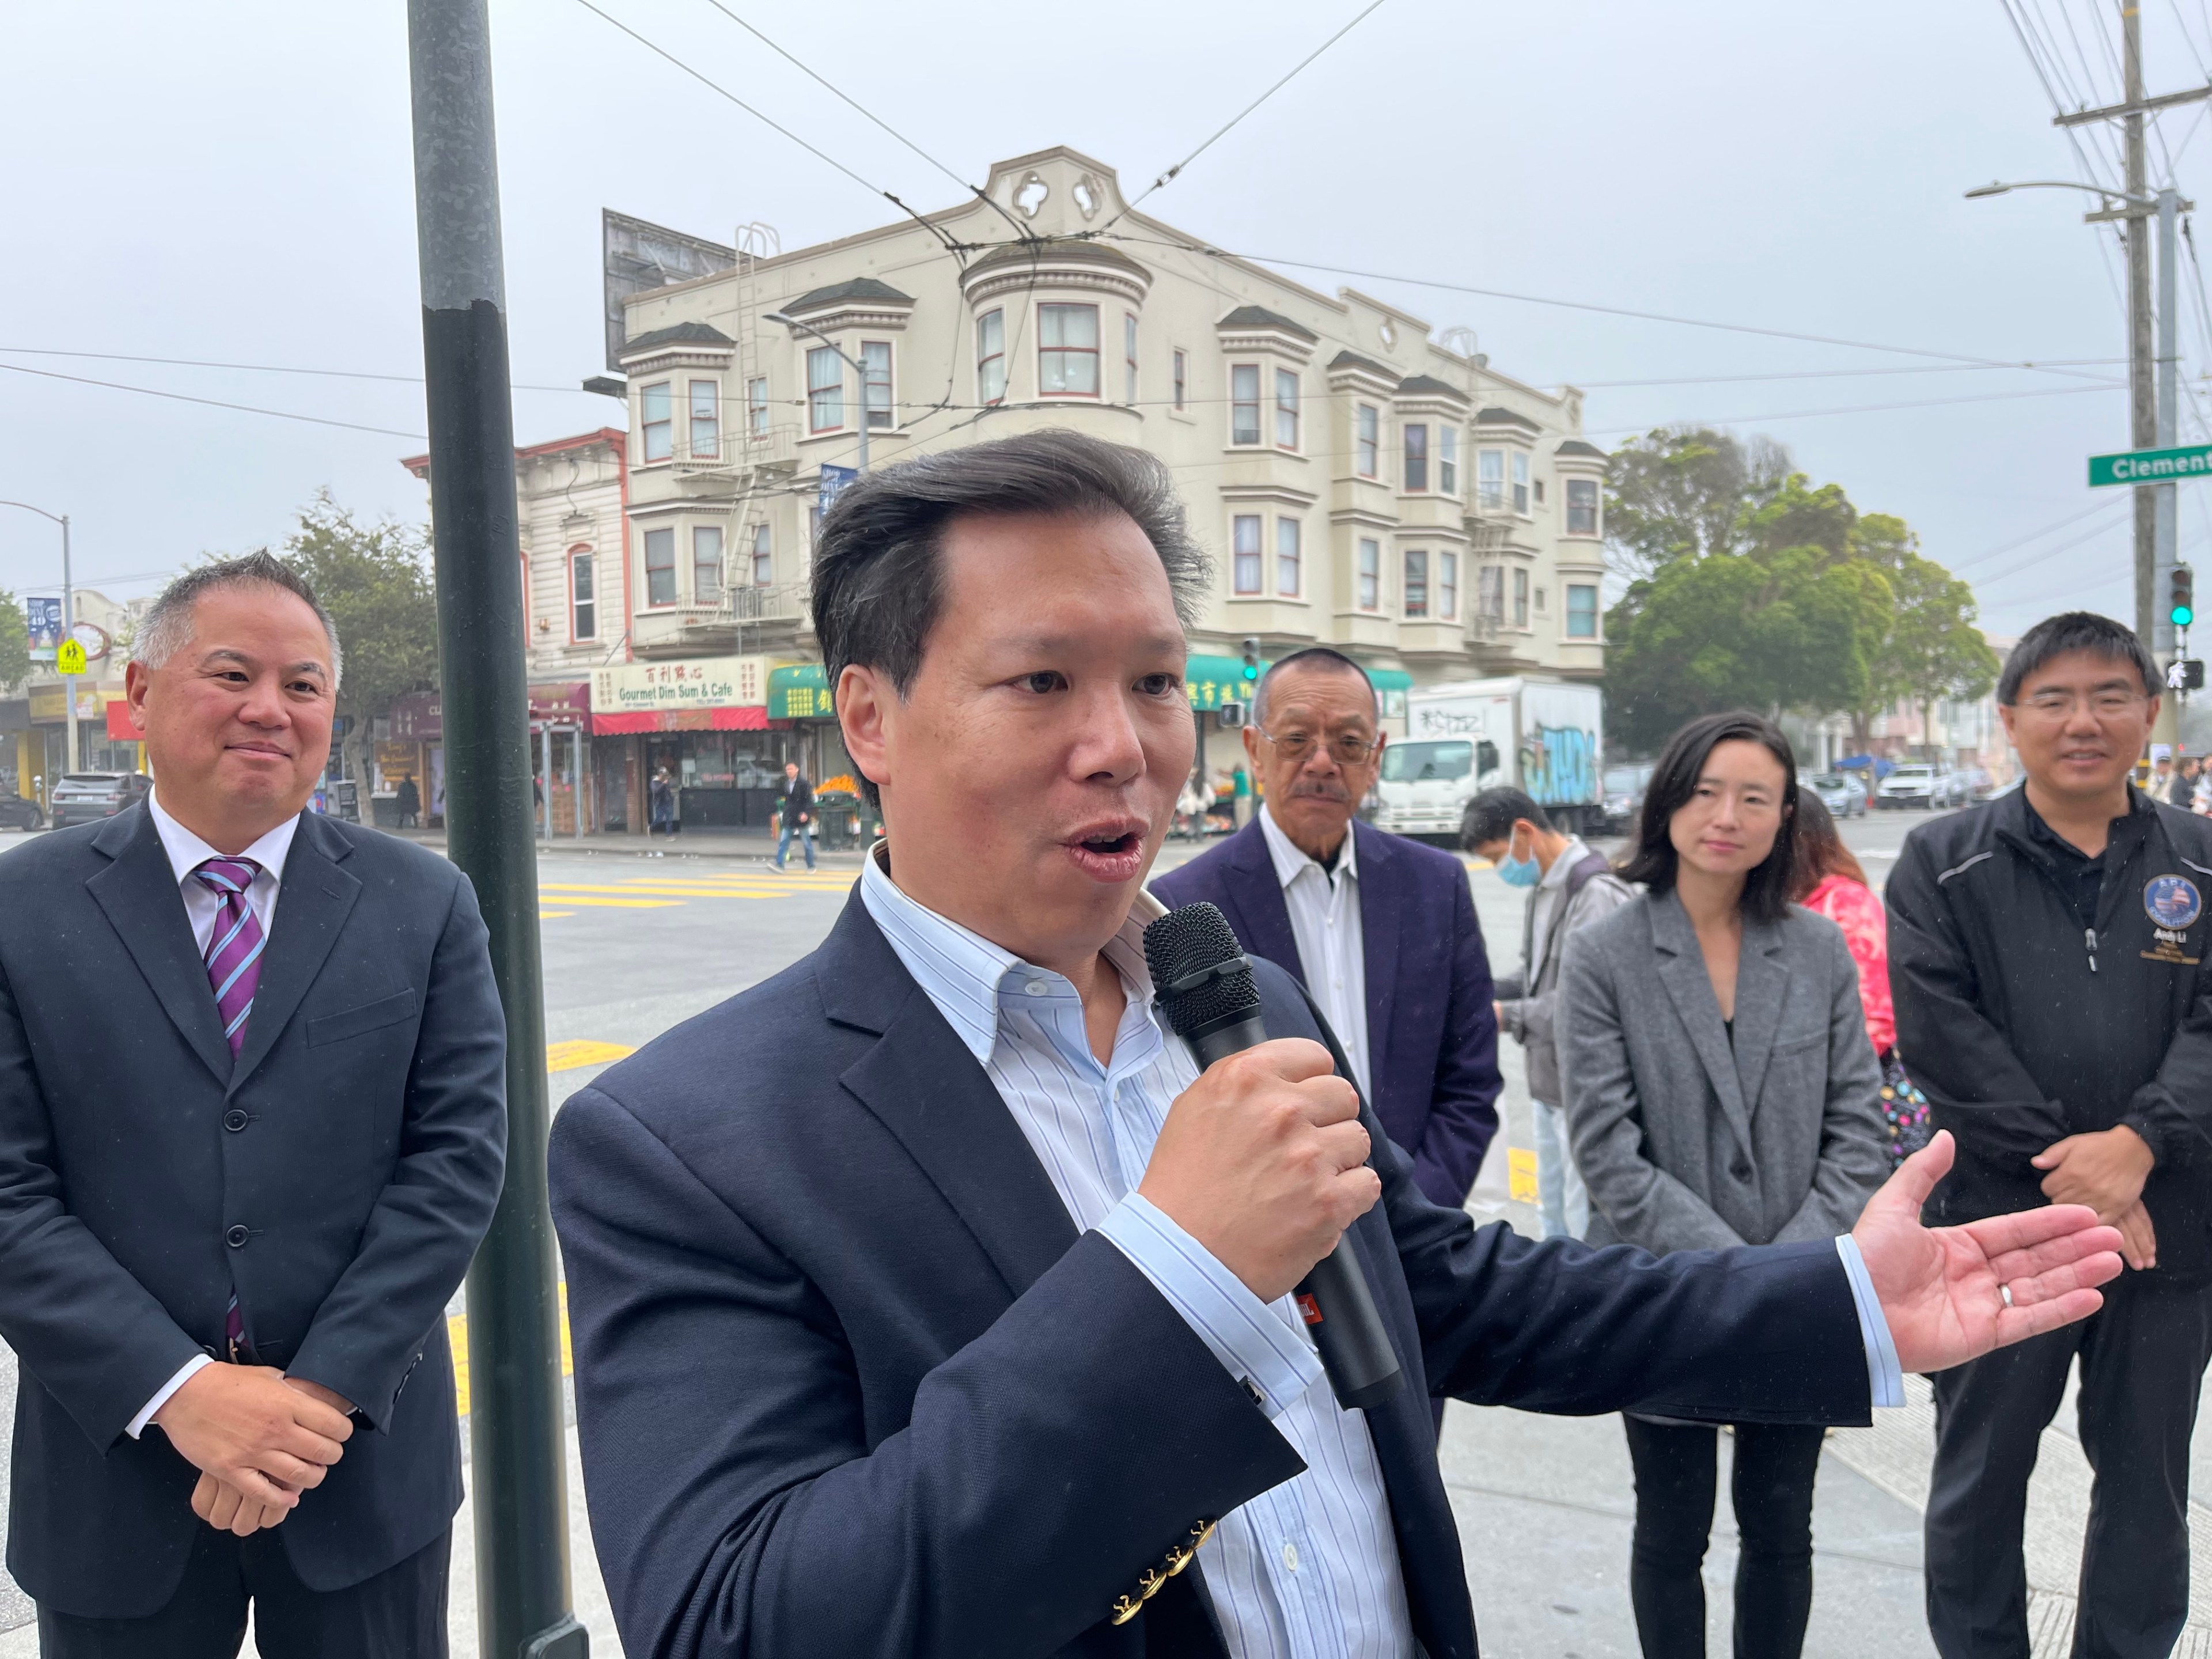 Fourth Time’s a Charm? San Francisco Chinese American Activist Makes Another Run for Office